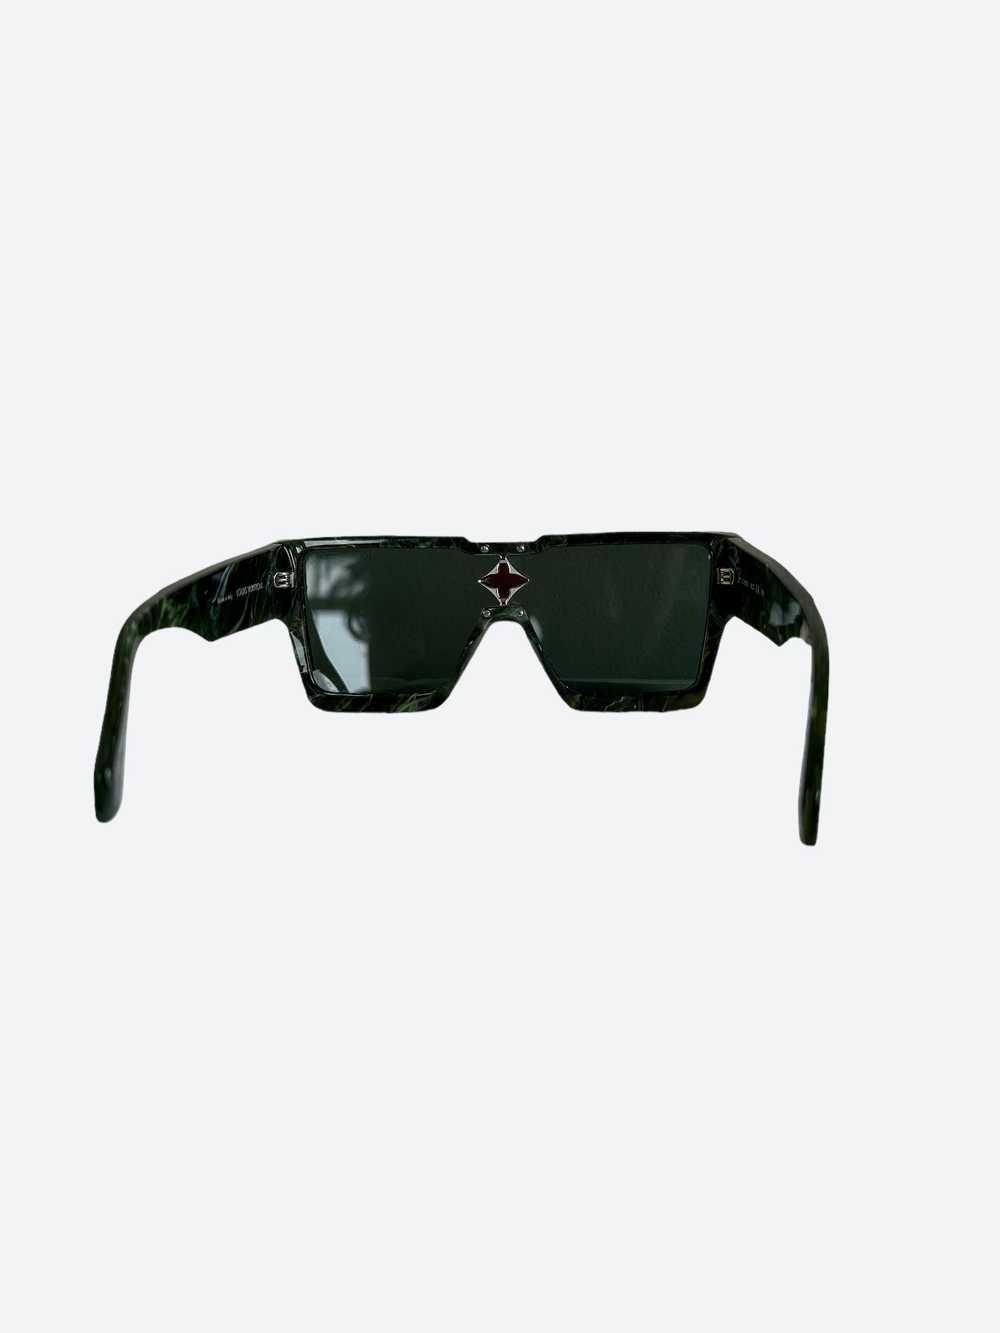 Louis Vuitton Cyclone Sport Mask Sunglasses - Flawless Crowns